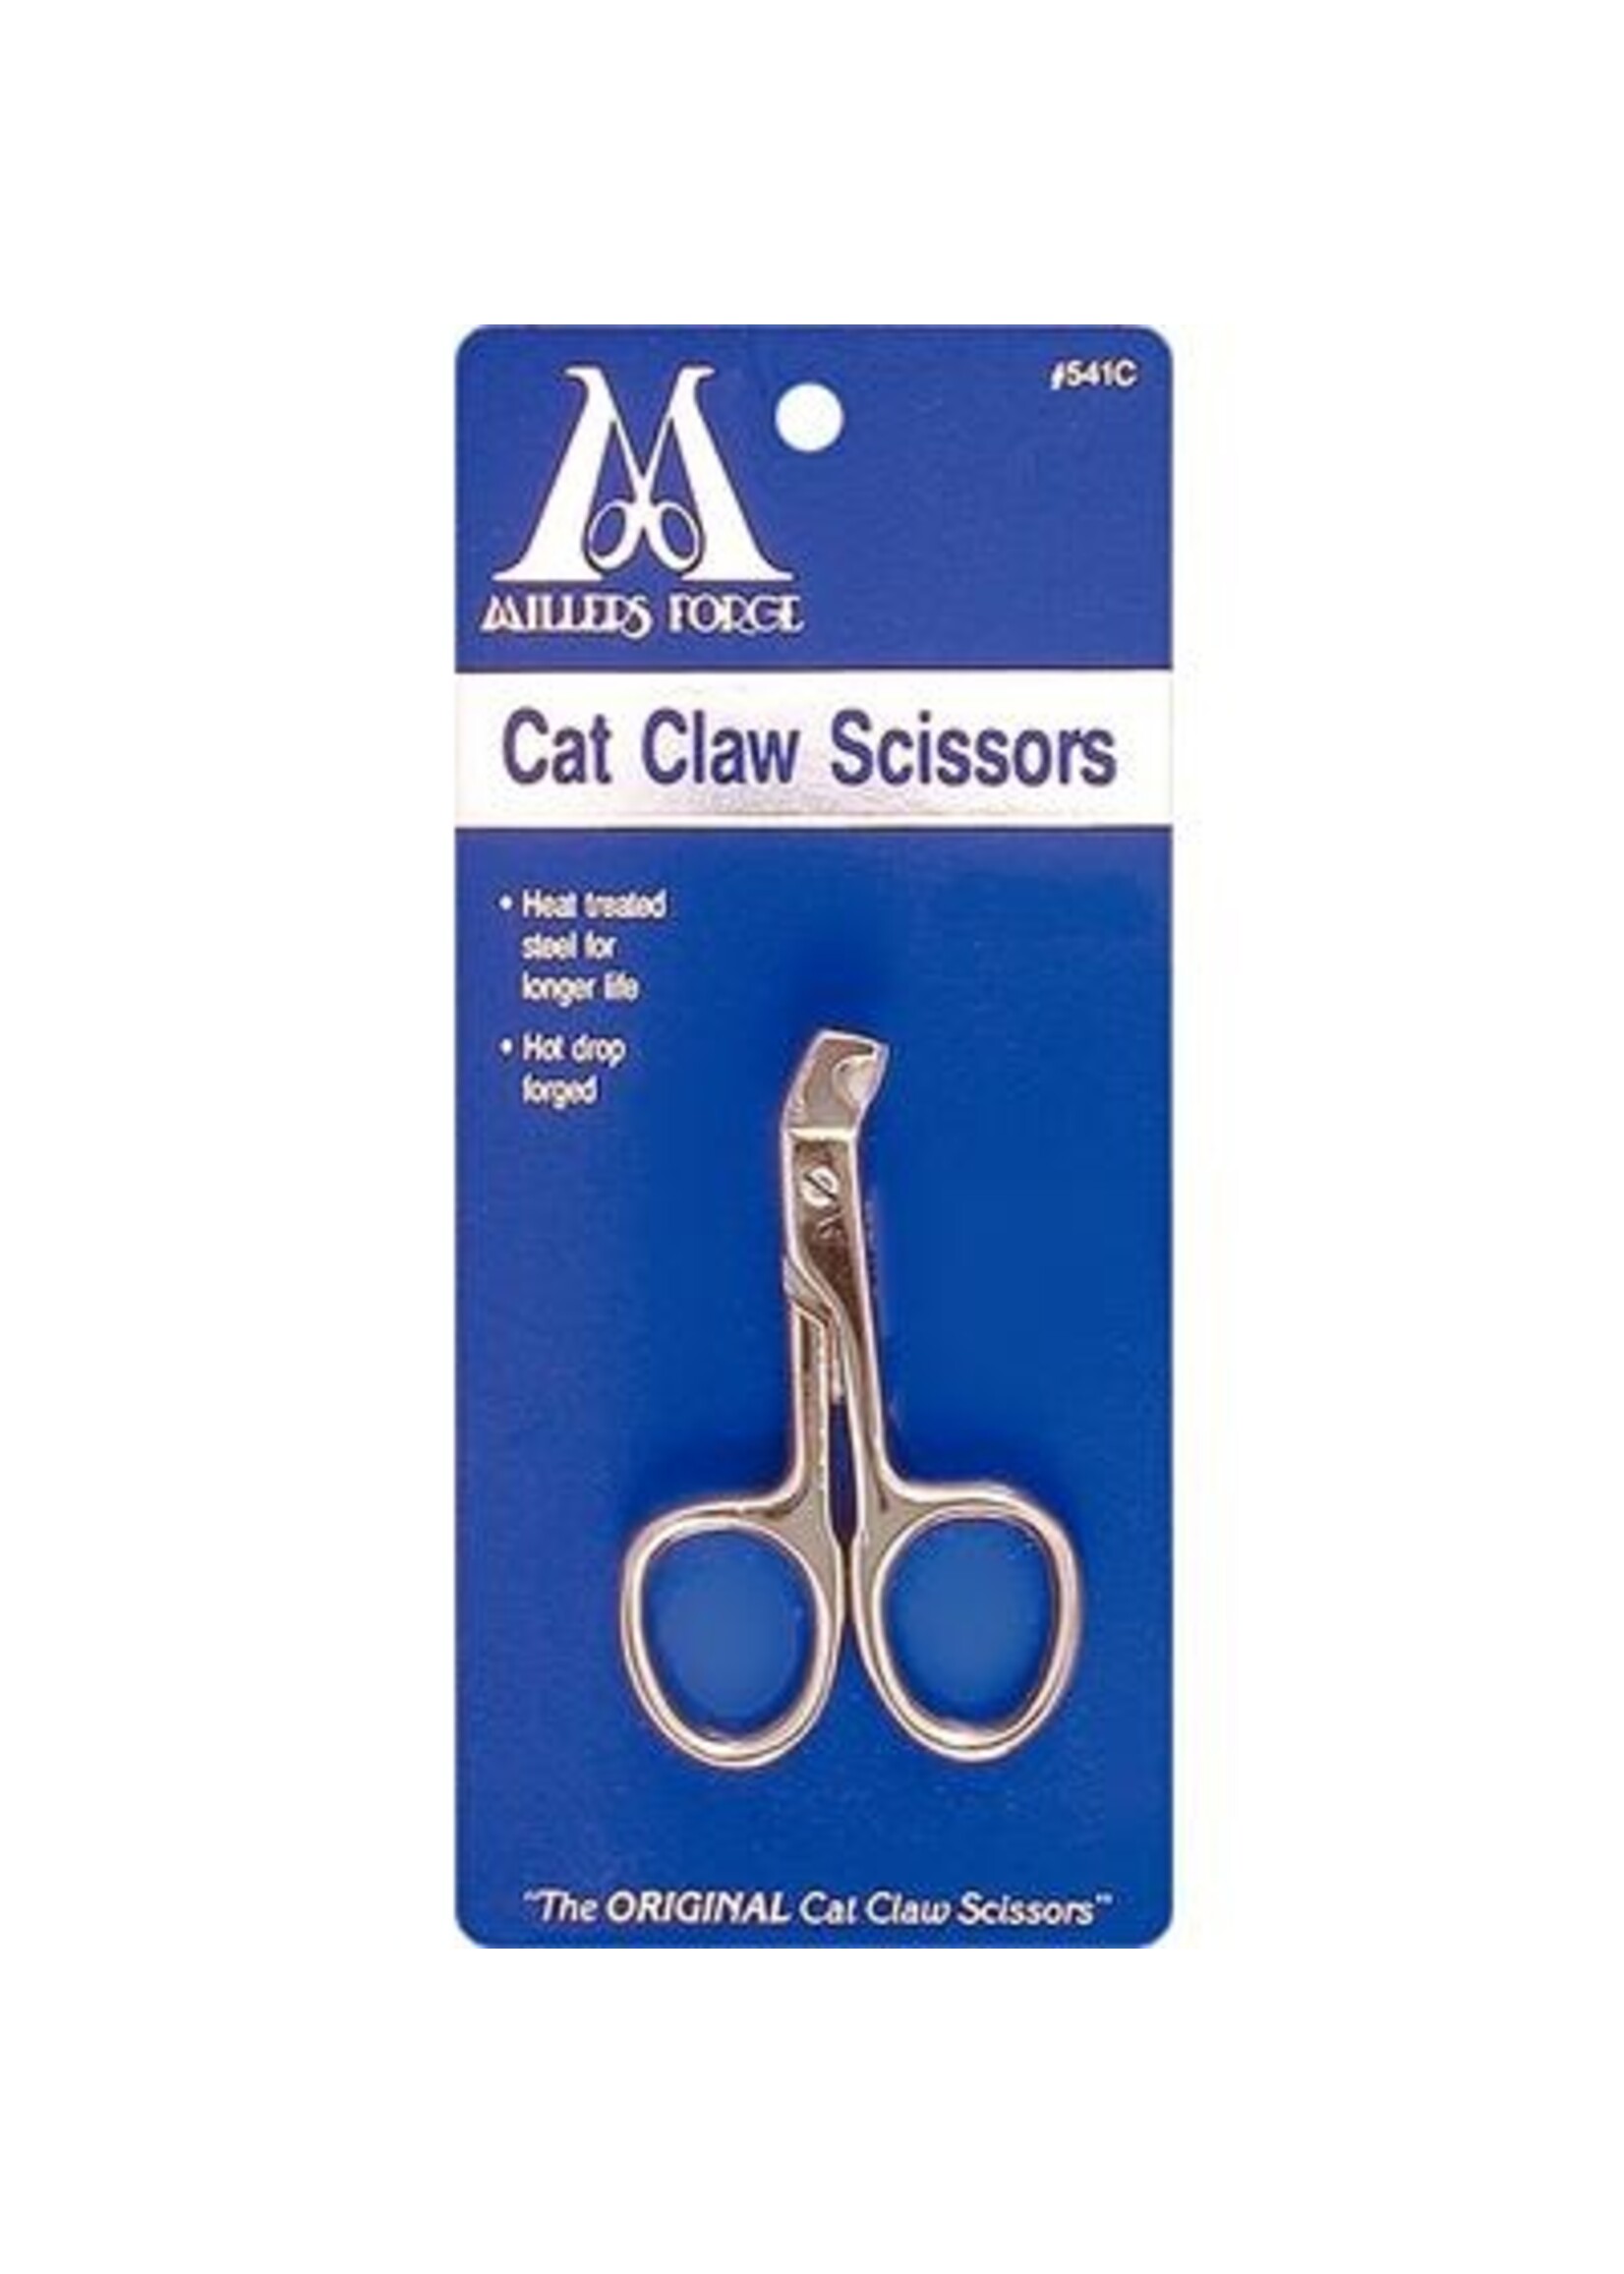 Miller Forge Miller Forge Cat Claw Scissors #541C